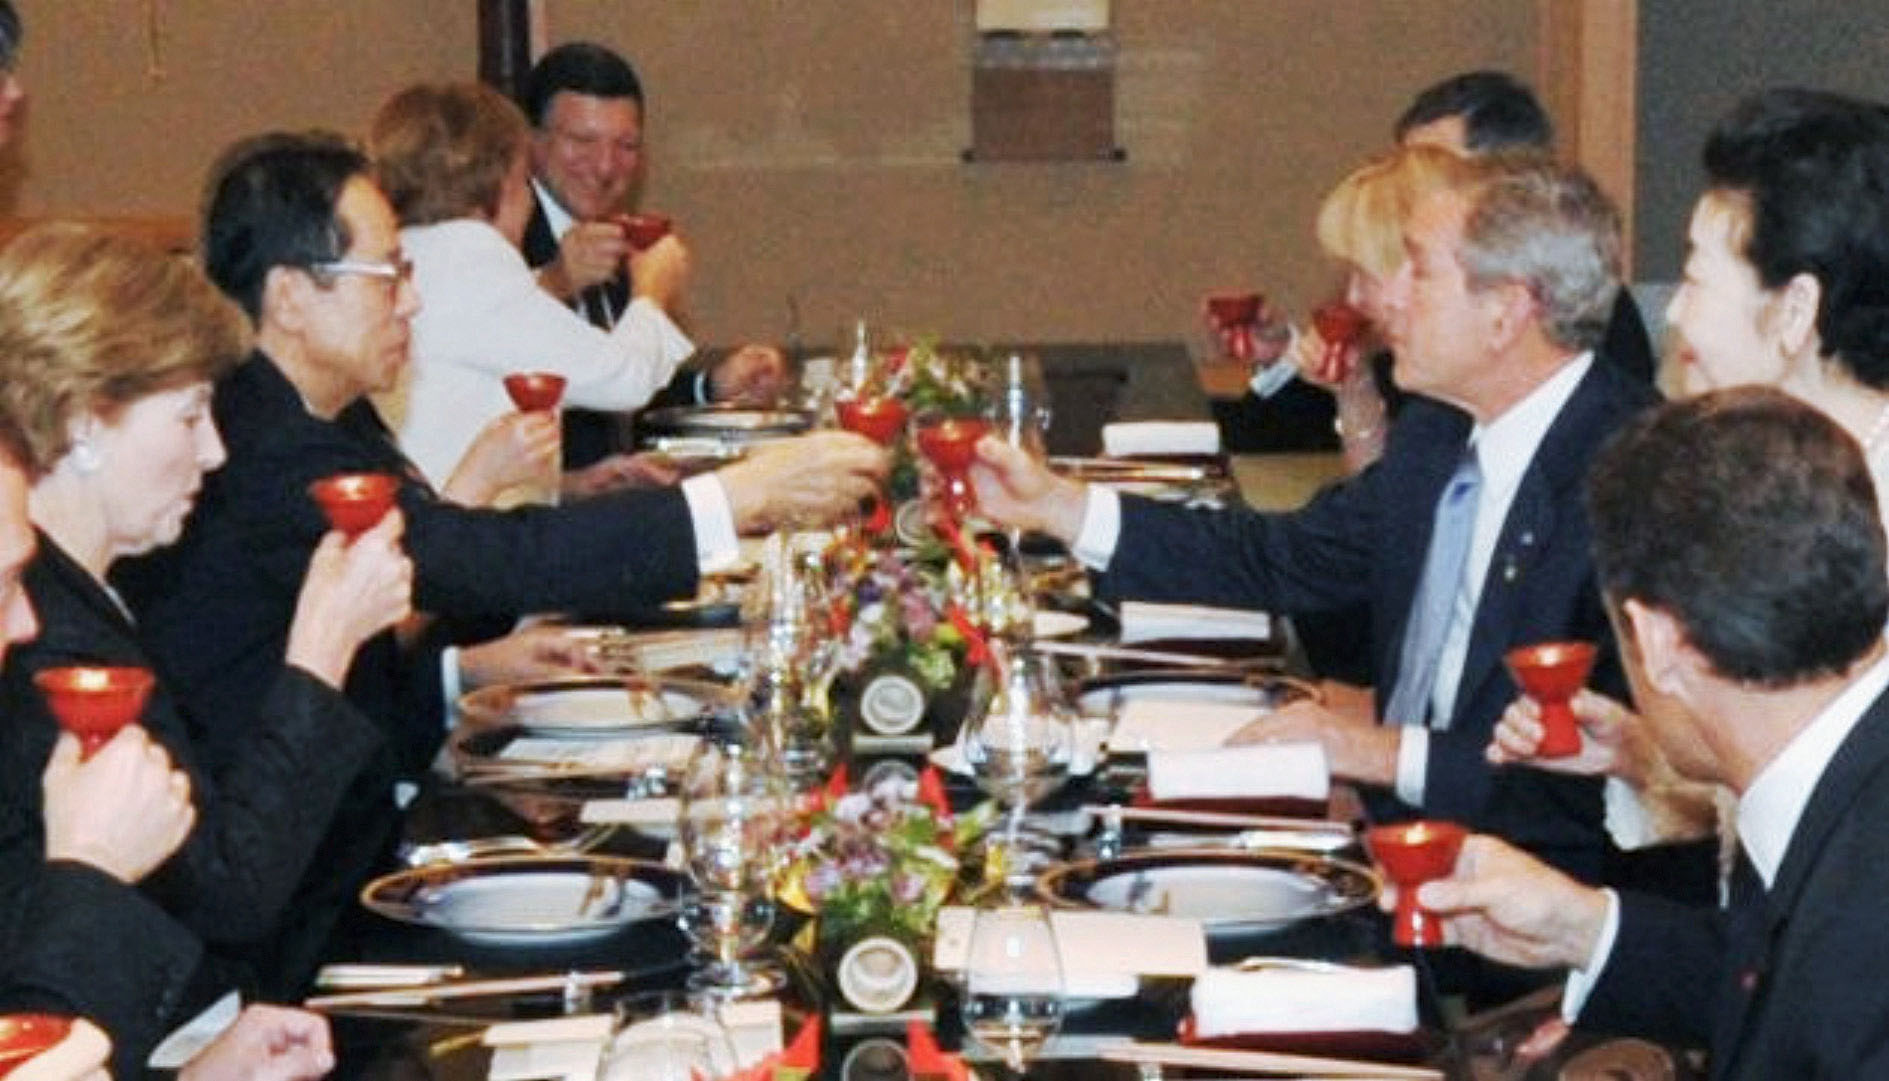 Prime Minister Yasuo Fukuda raises a sake cup with U.S. President George W. Bush and other Group of Eight leaders at a welcome dinner at the Windsor Hotel Toya in the town of Toyako, Hokkaido, on July 7, 2008. | KYODO